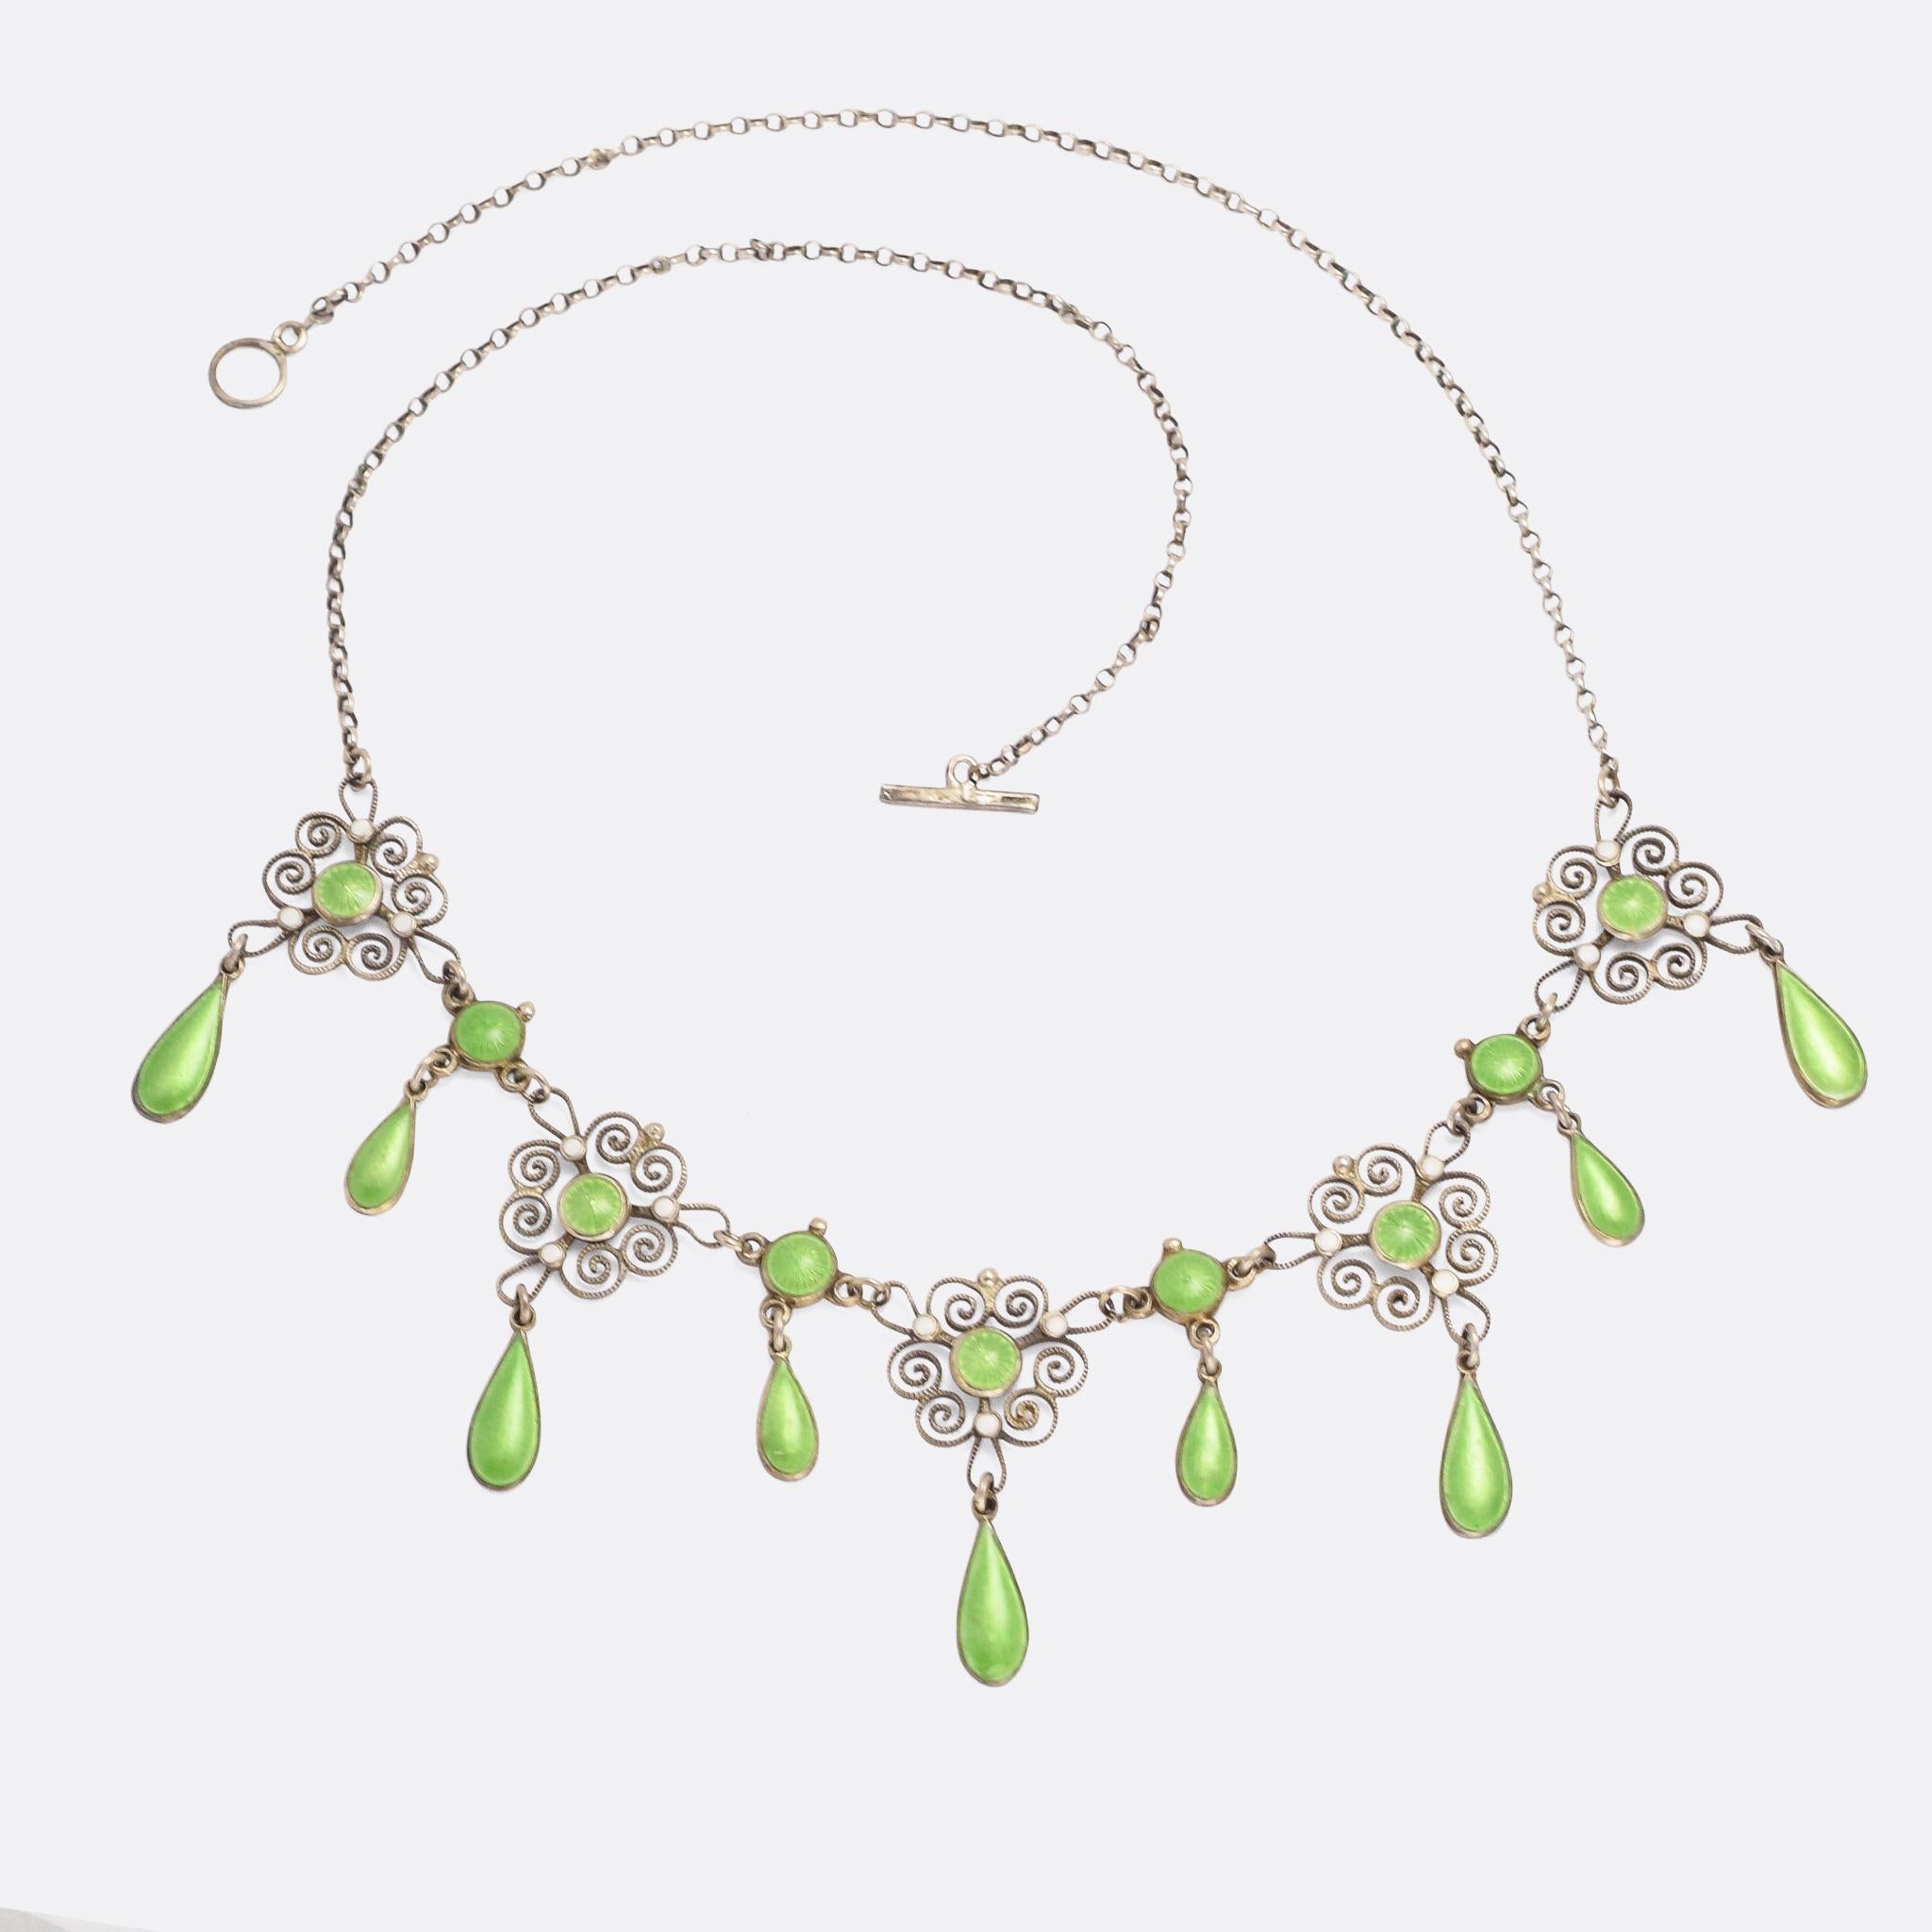 An Art Nouveau filigree necklace by Norwegian jeweller Marius Hammer. It was made around the turn of the 20th Century, featuring swirling ropework filigree along with green and white enamel drops - a tasteful combination of smooth and guilloché